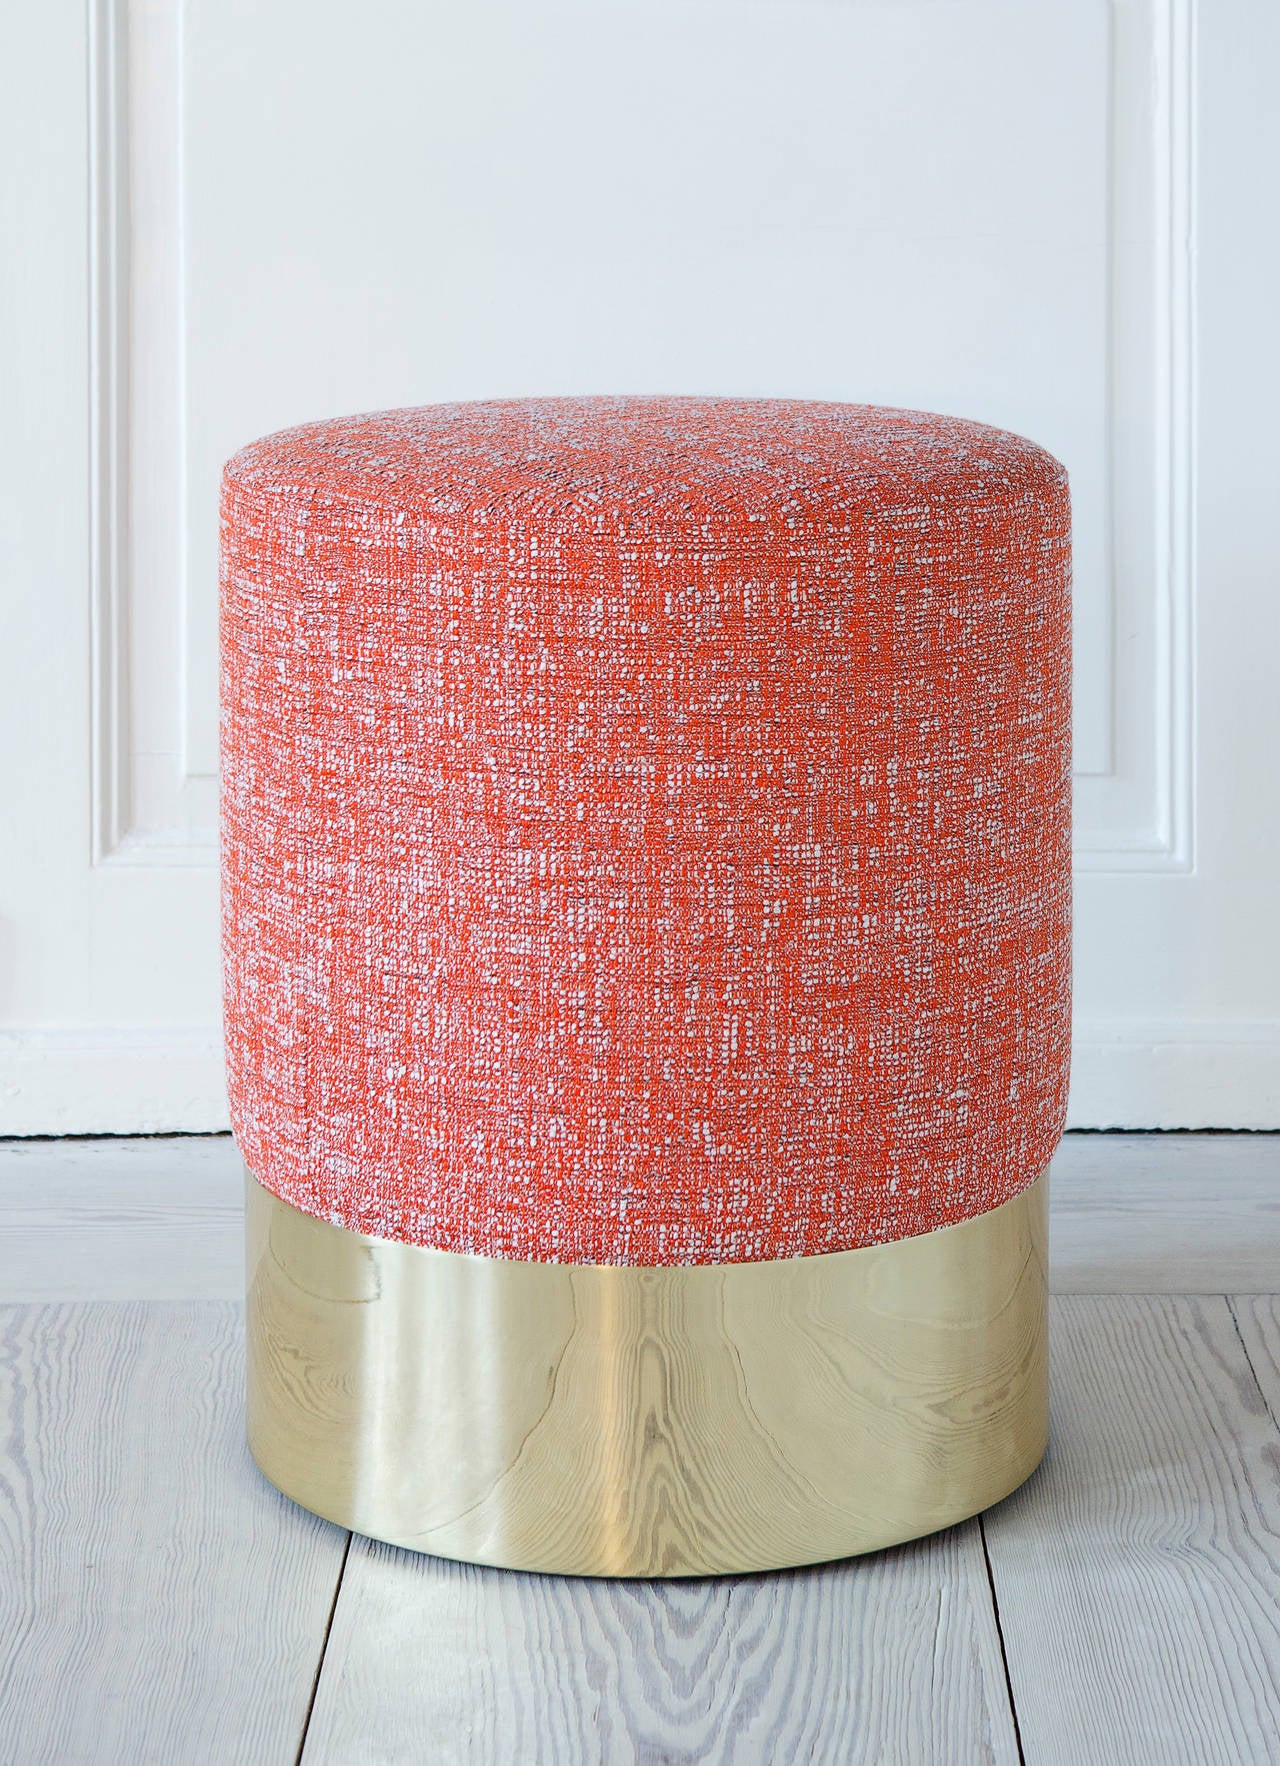 Azucena stool upholstered in tweed textile for The Apartment. Brass base. Designed by Luigi Caccia Dominioni in 1963. Contemporary production by Azucena.